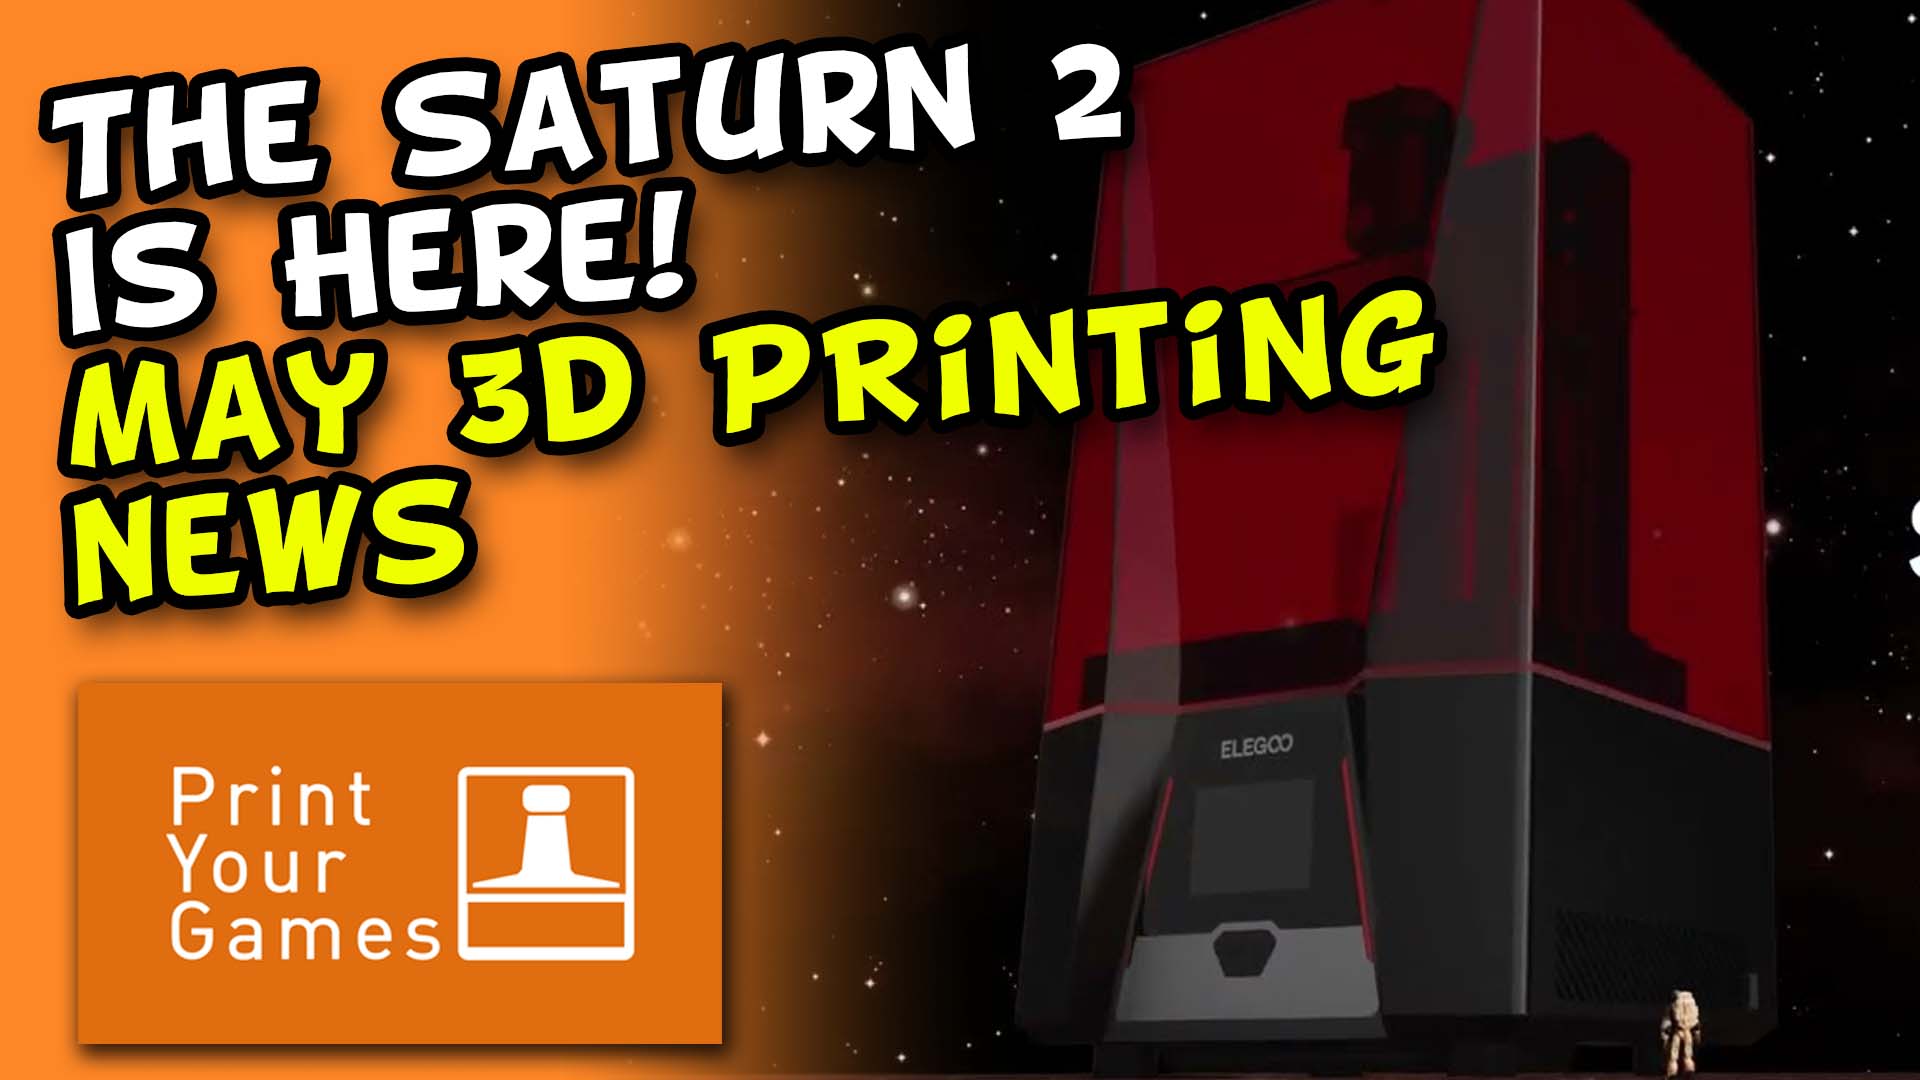 The Saturn 2 is Here! May 3d Printing News